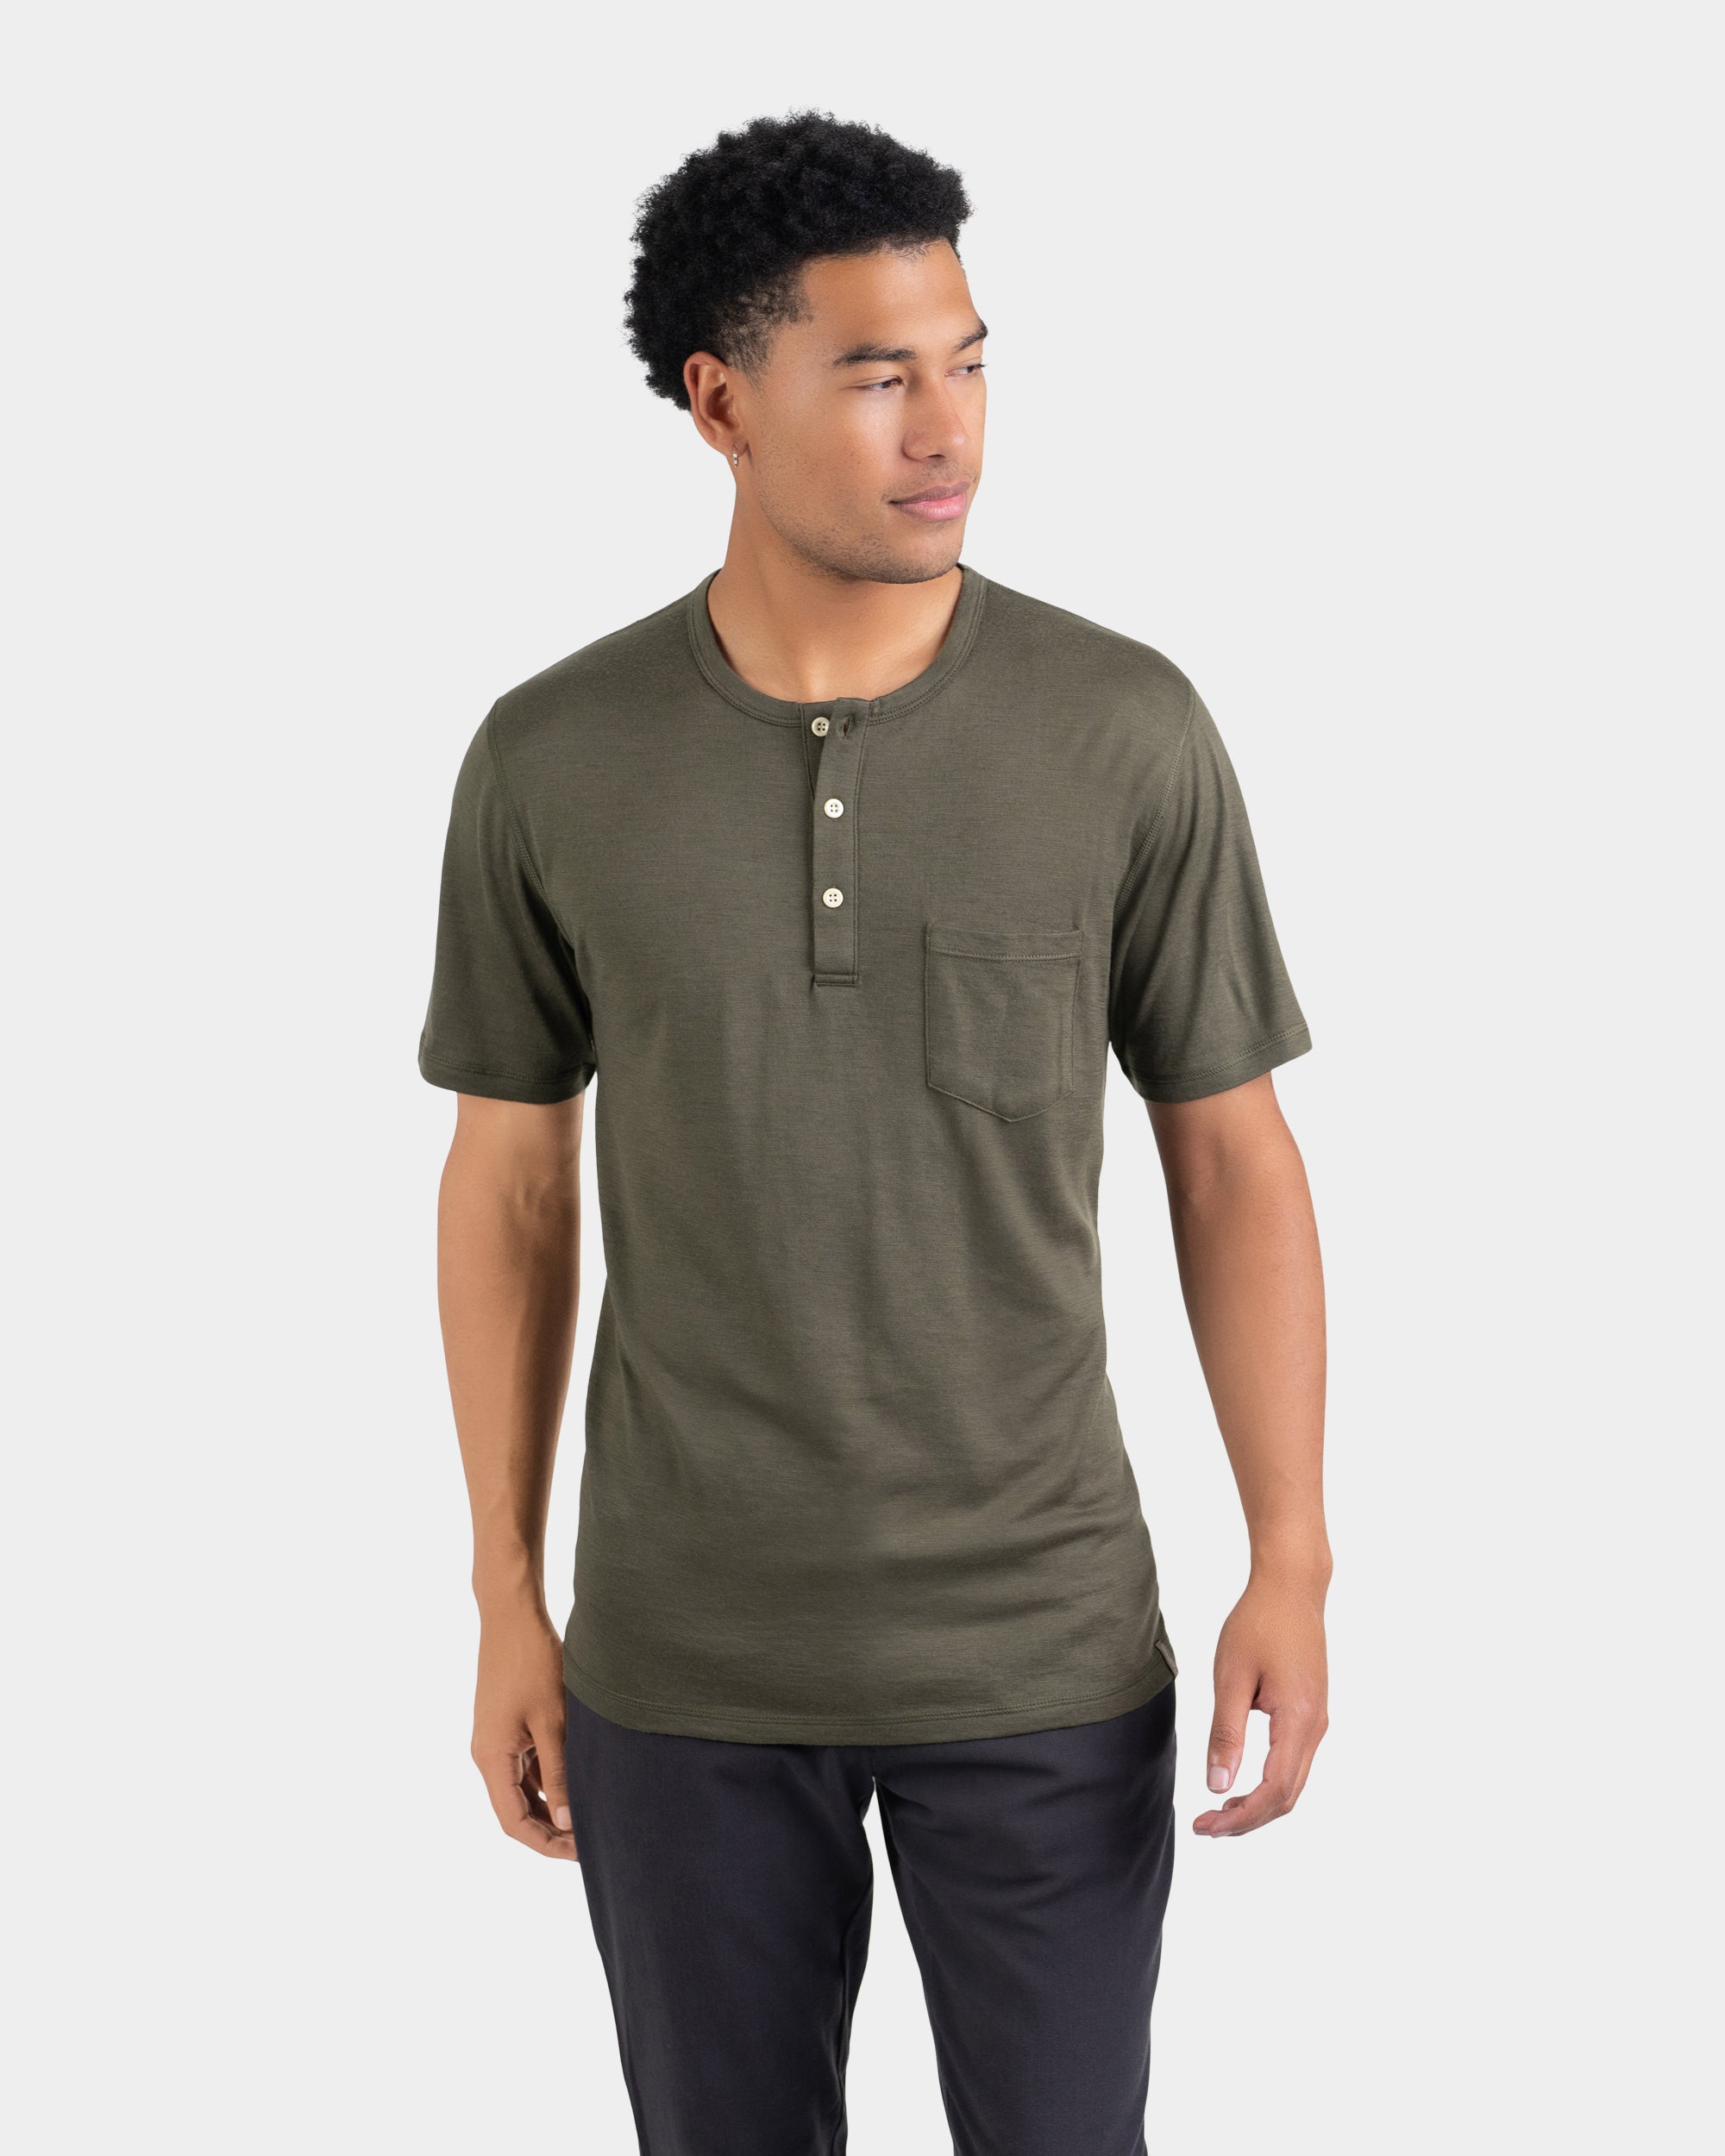 Woolly Clothing Co. Men's Short Sleeve Button Up